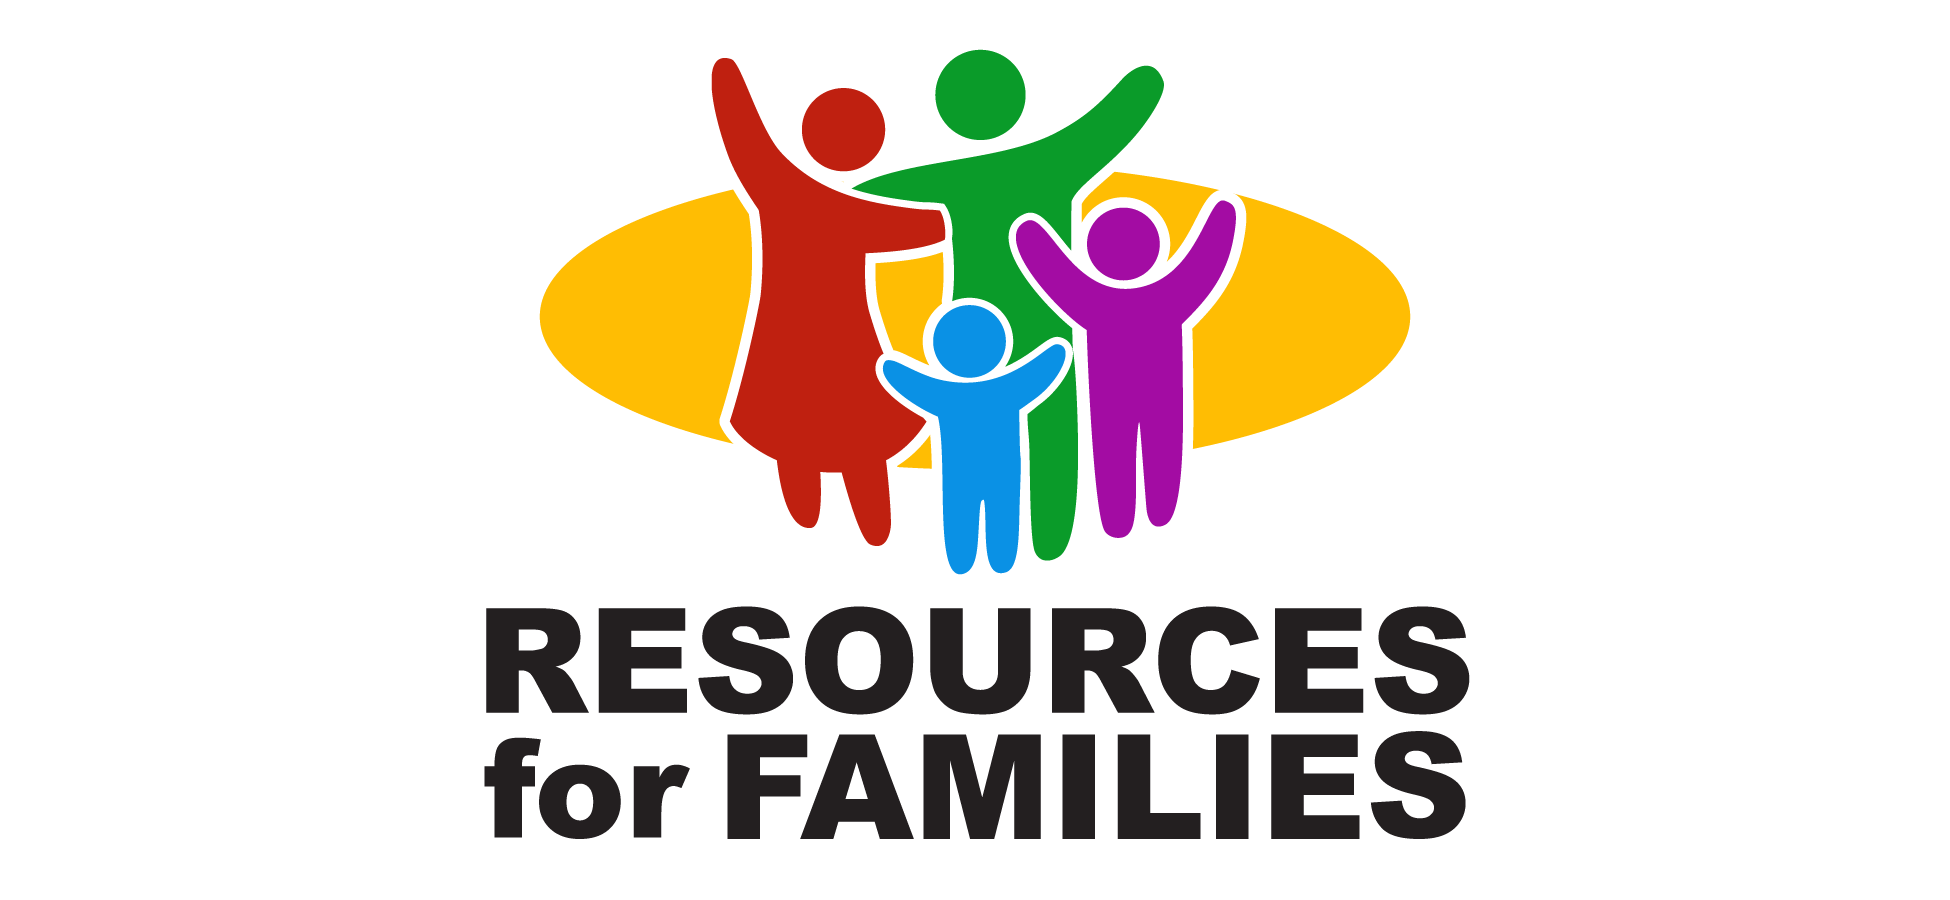 Resources for Families - 4C logo